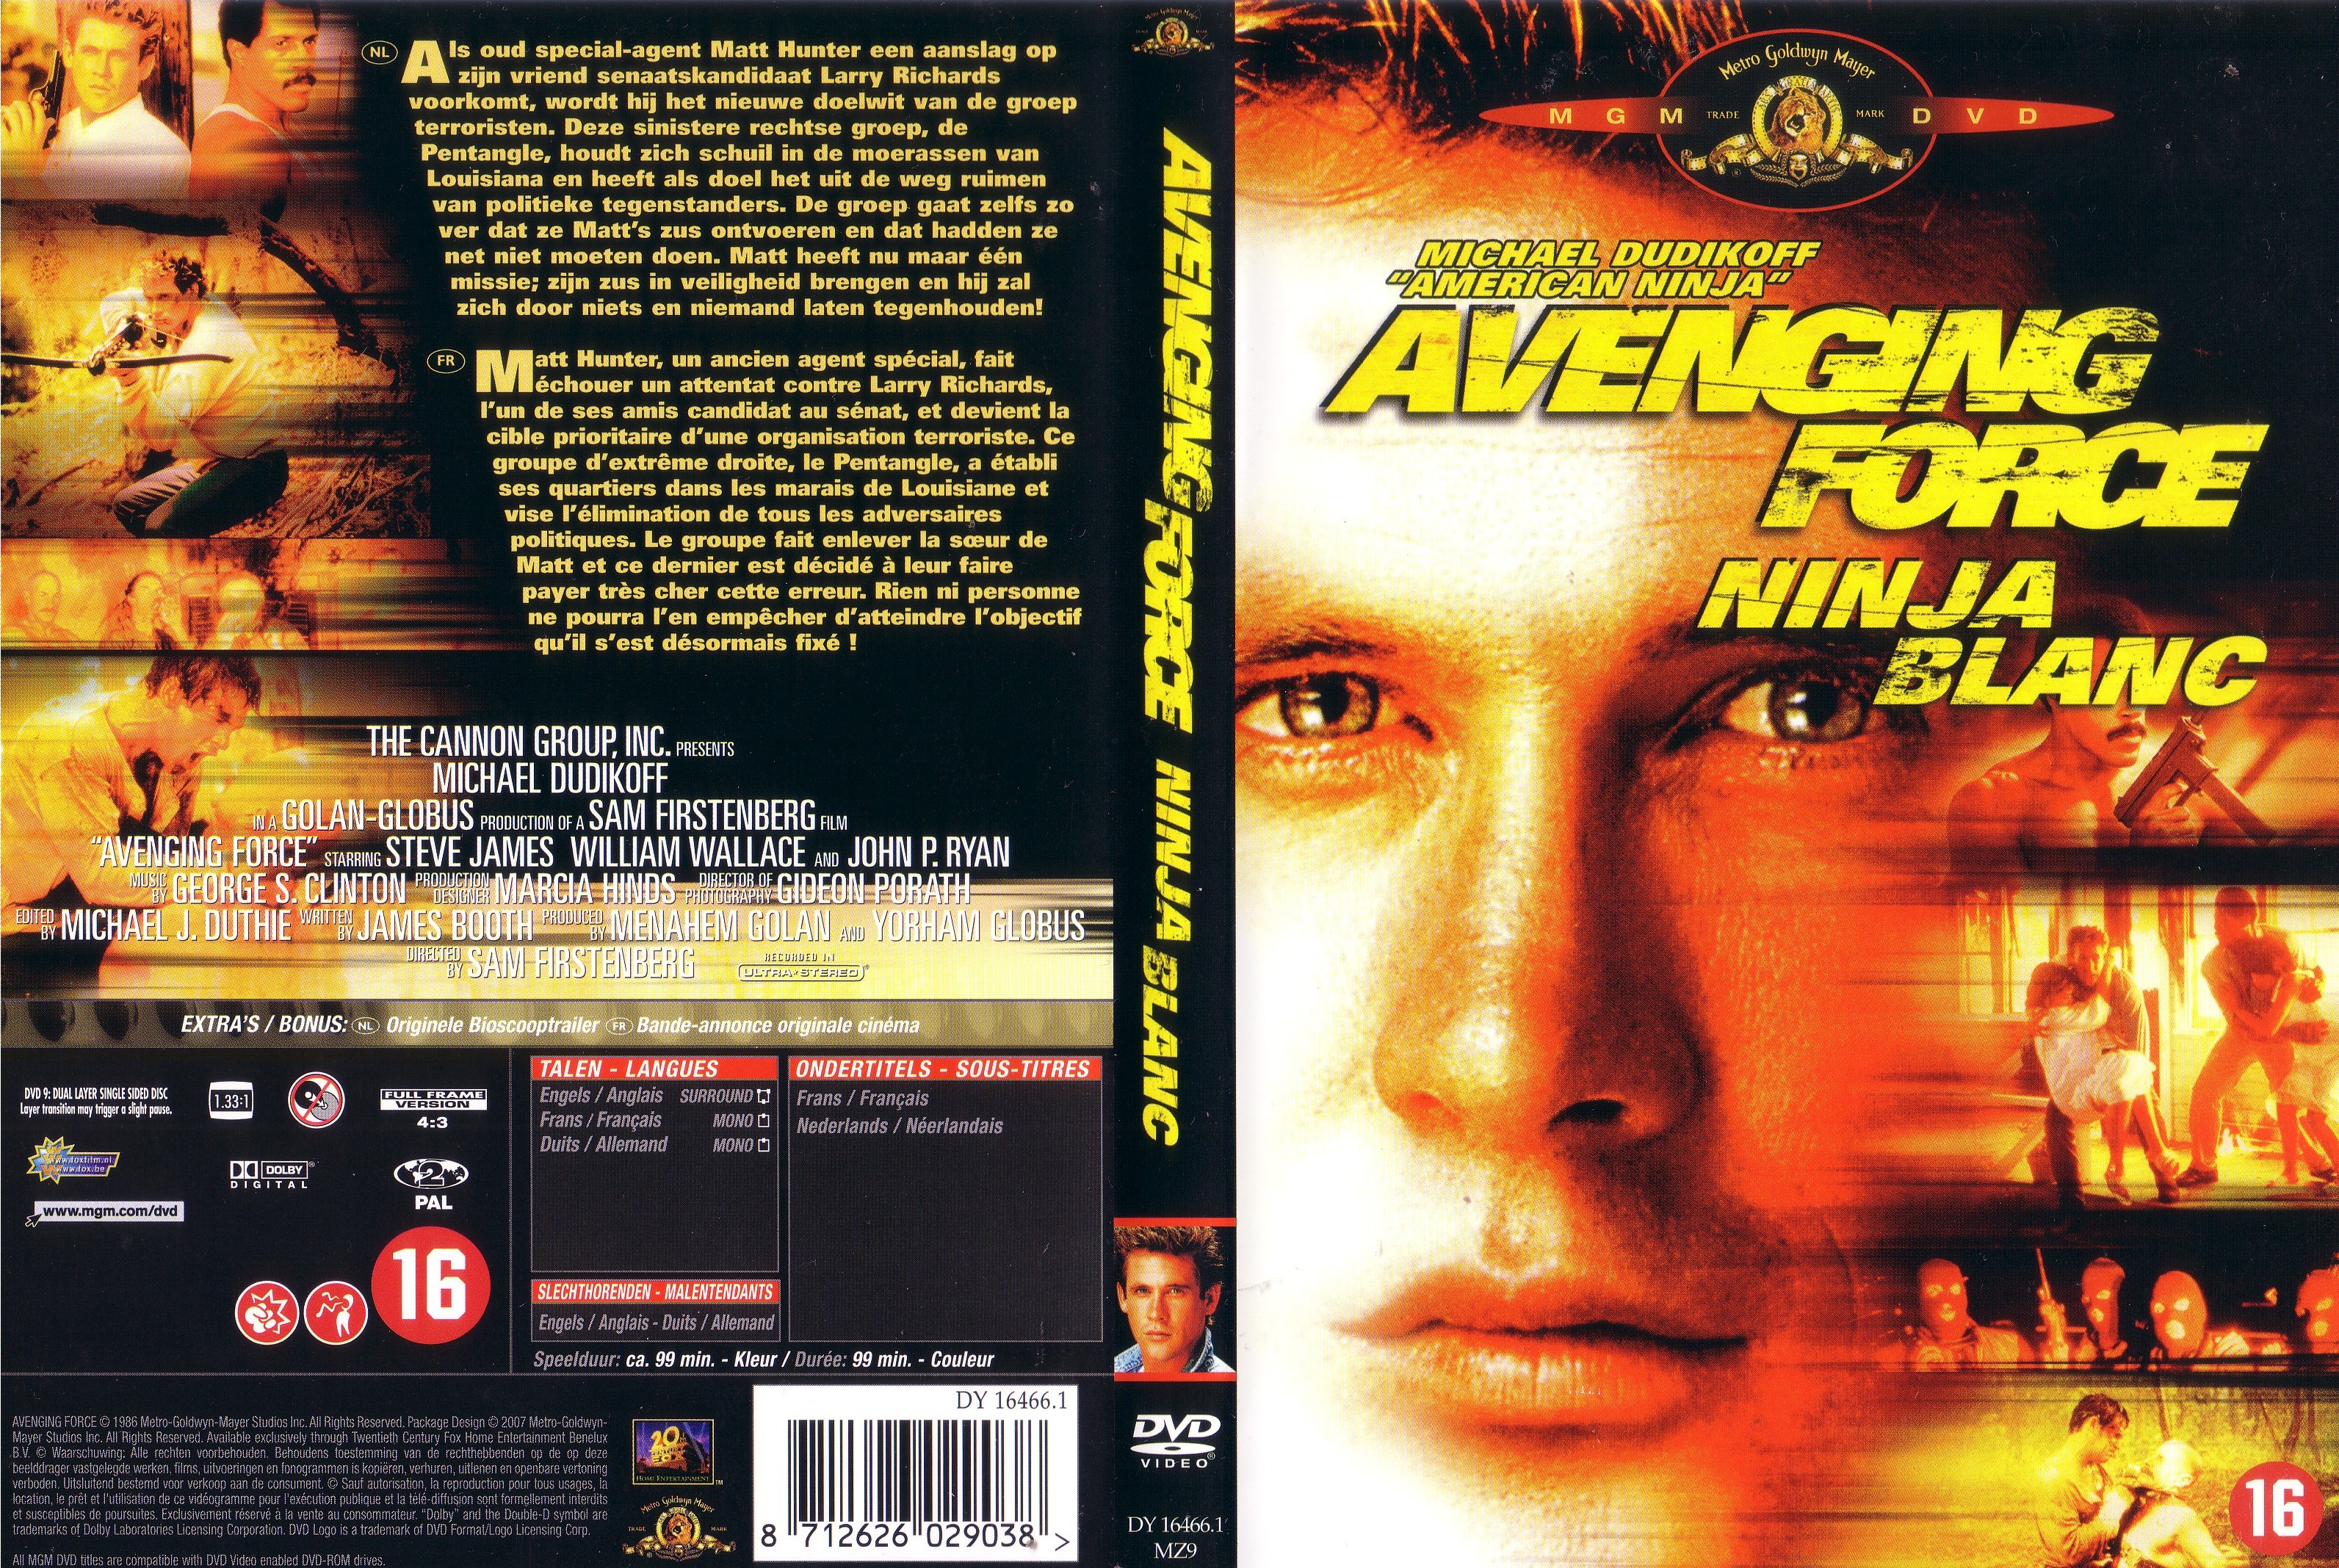 Jaquette DVD Avenging force